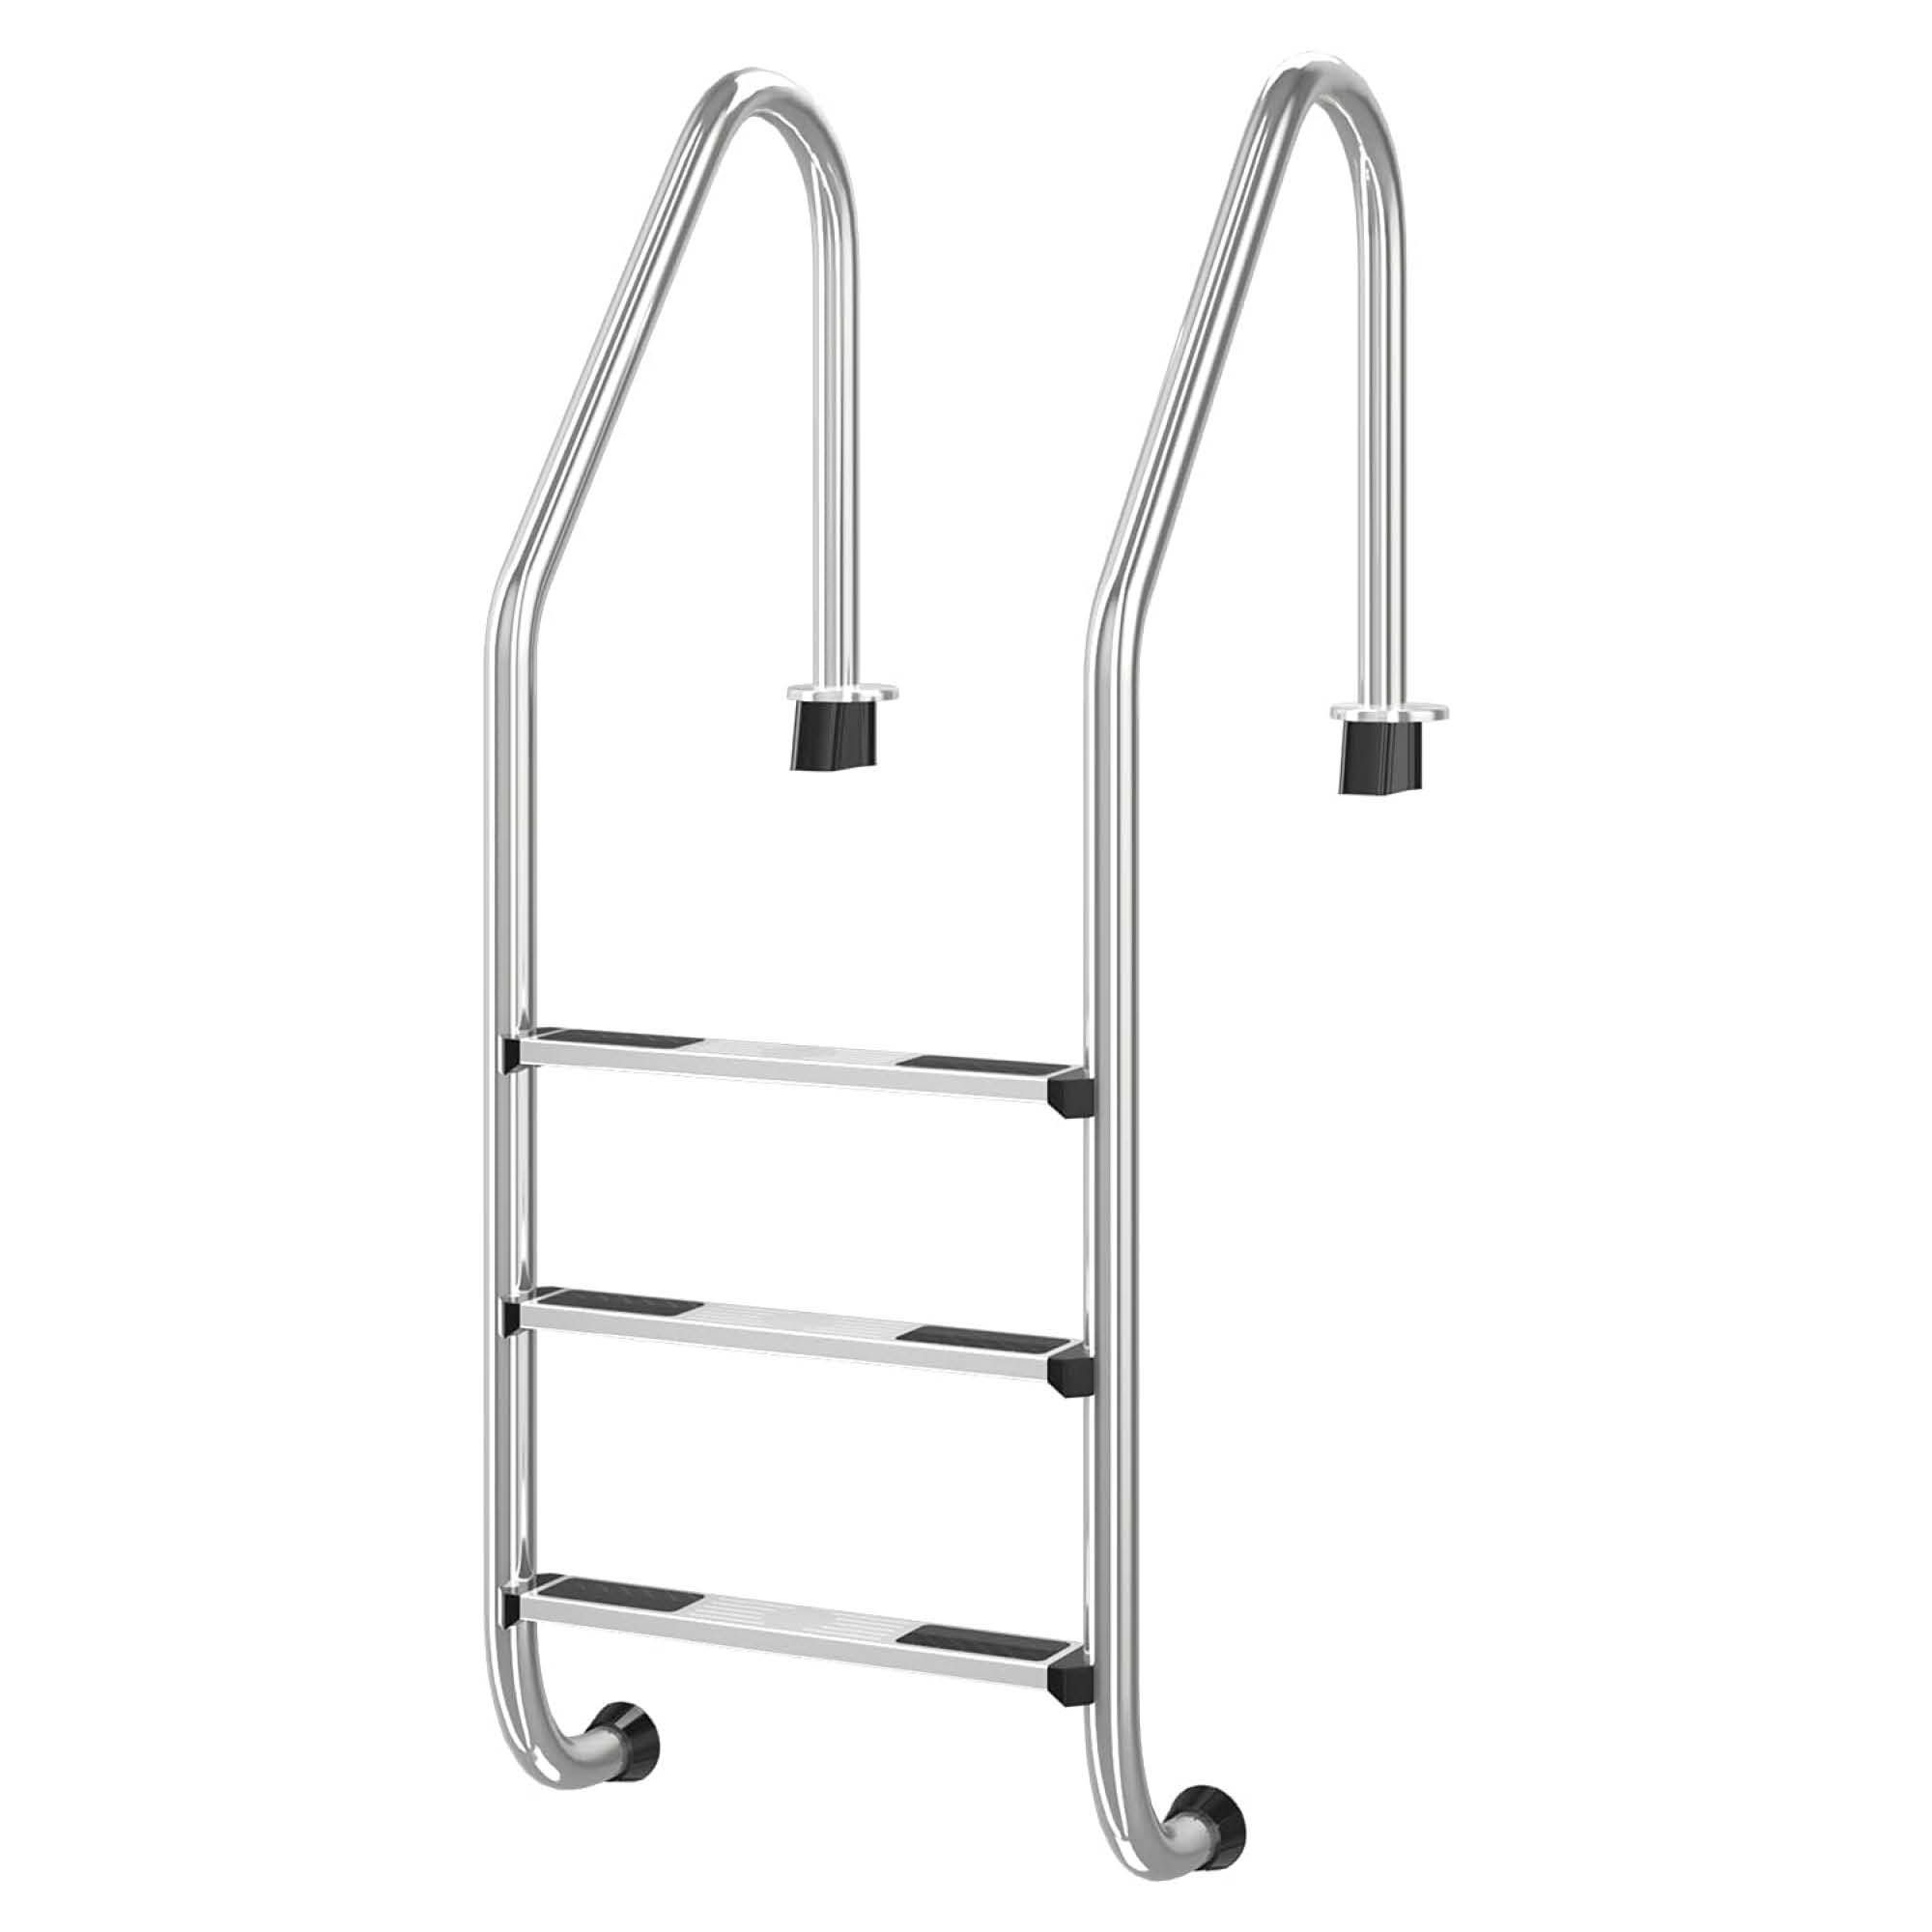 The 9 Best Pool Ladders 2021, 5 Step Stainless Steel Above Ground Pool Ladder